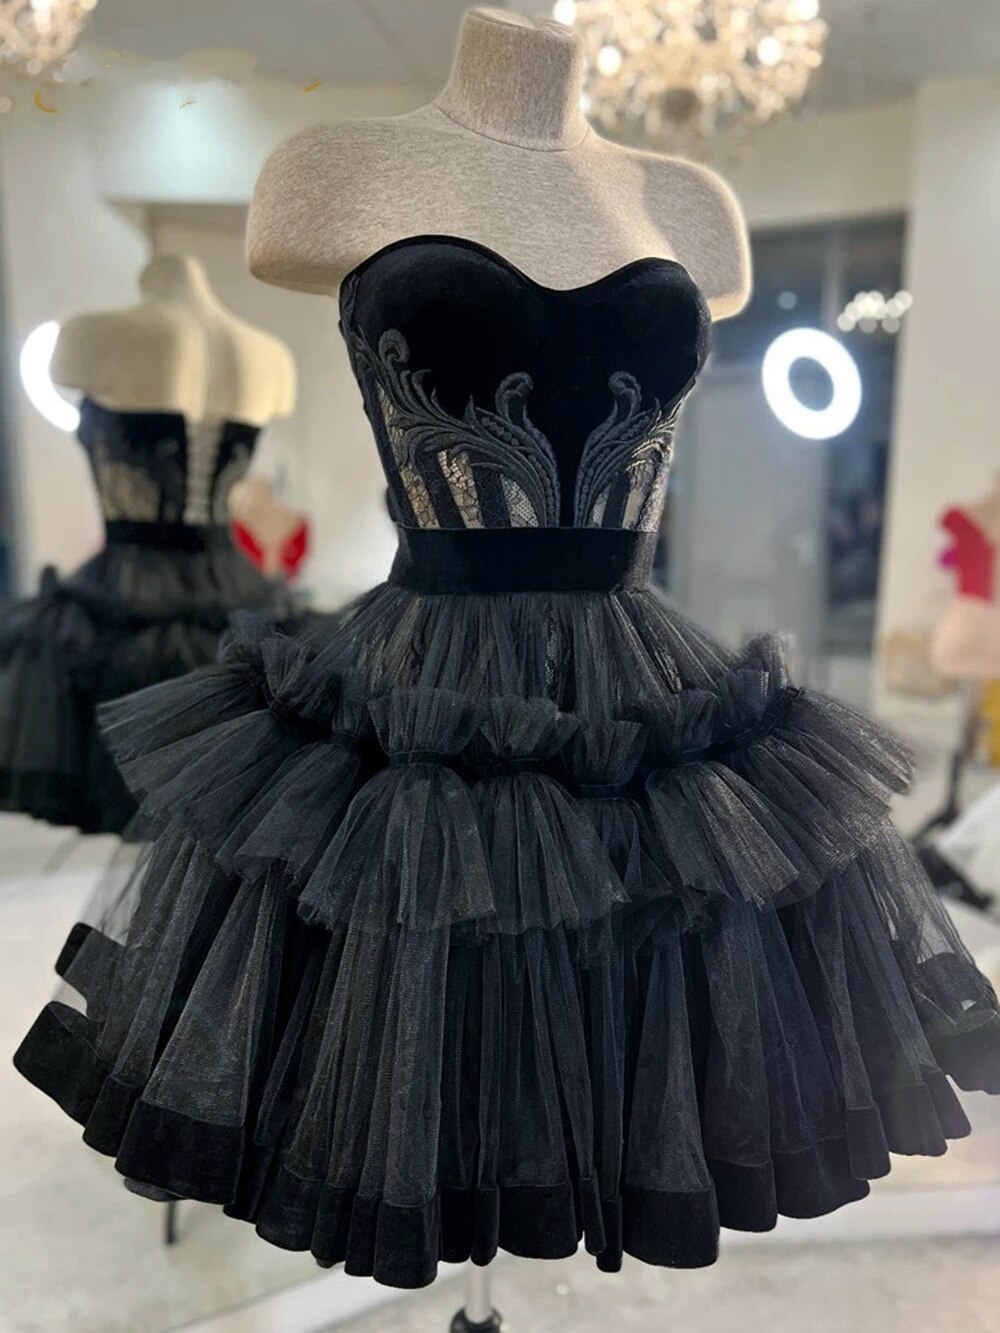 Little Black Short Homecoming Dresses Lace Exposed Bonong Mini Party Pom Gowns Tulle Tutu Skirt Gothic Graduation Outfits